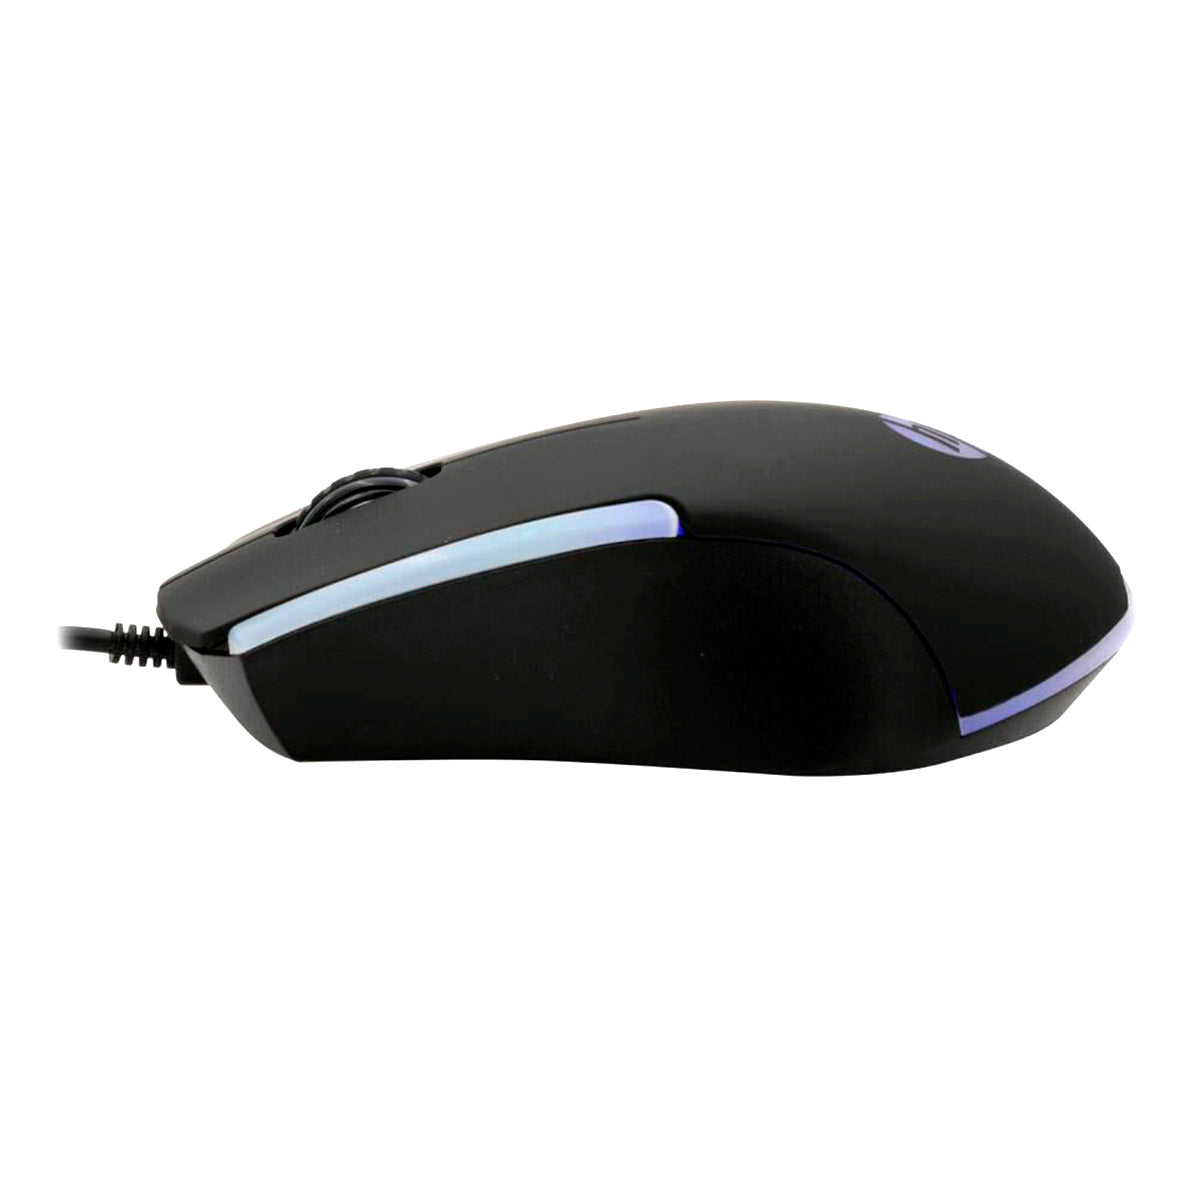 MOUSE GAMER HP M160